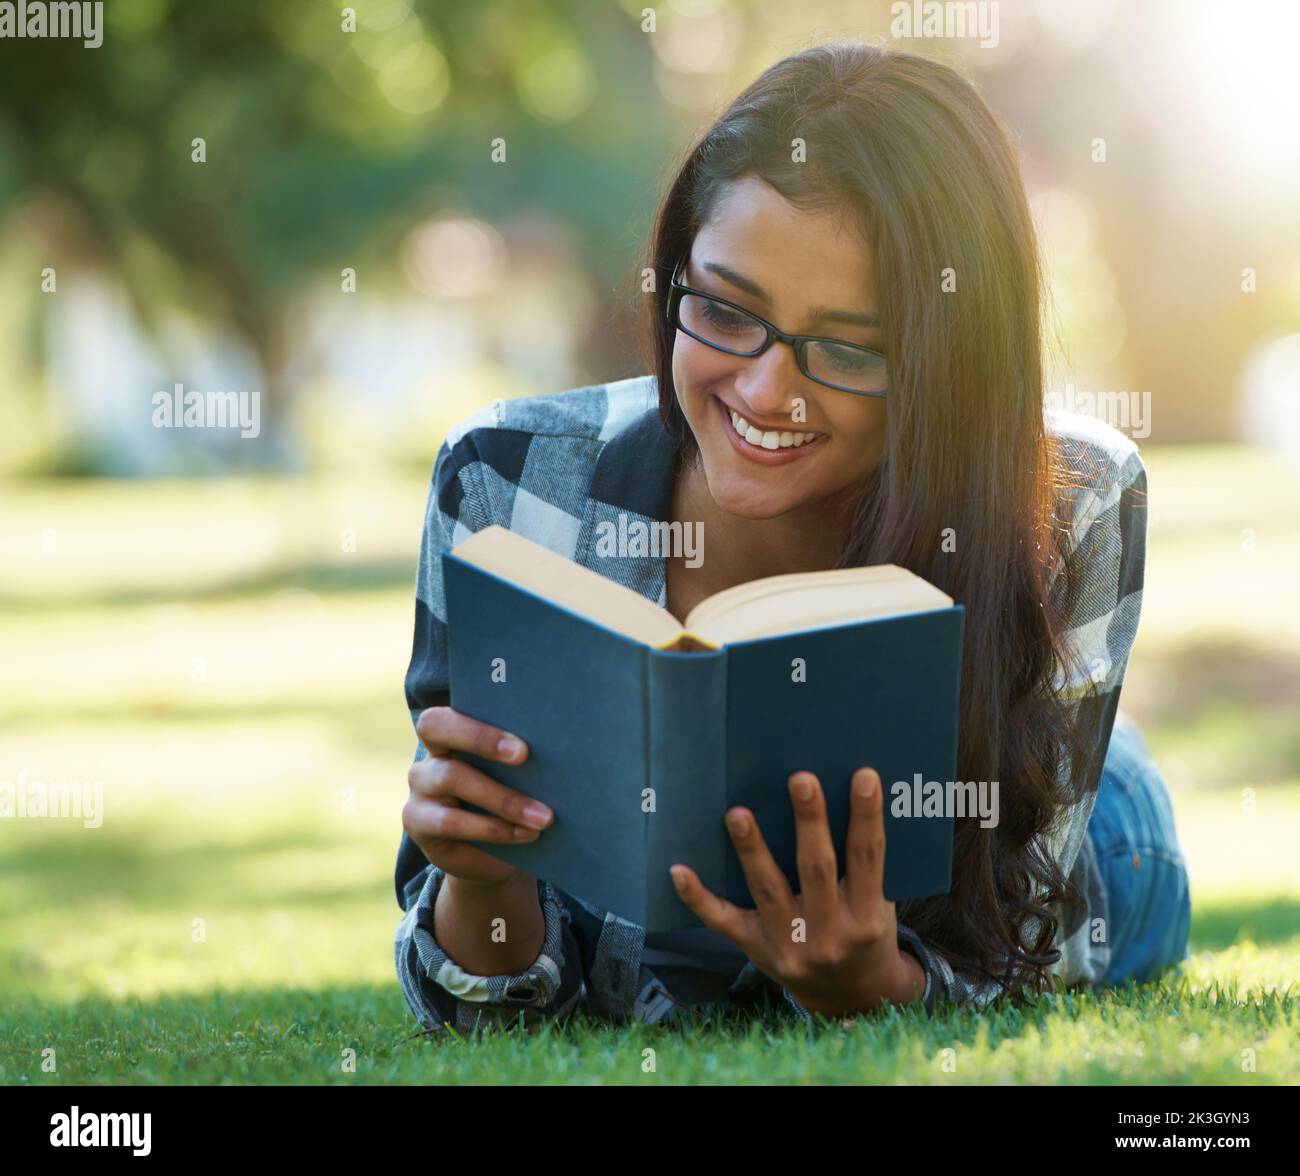 Woman lying down with hardcover book reading Stock Photo - Alamy